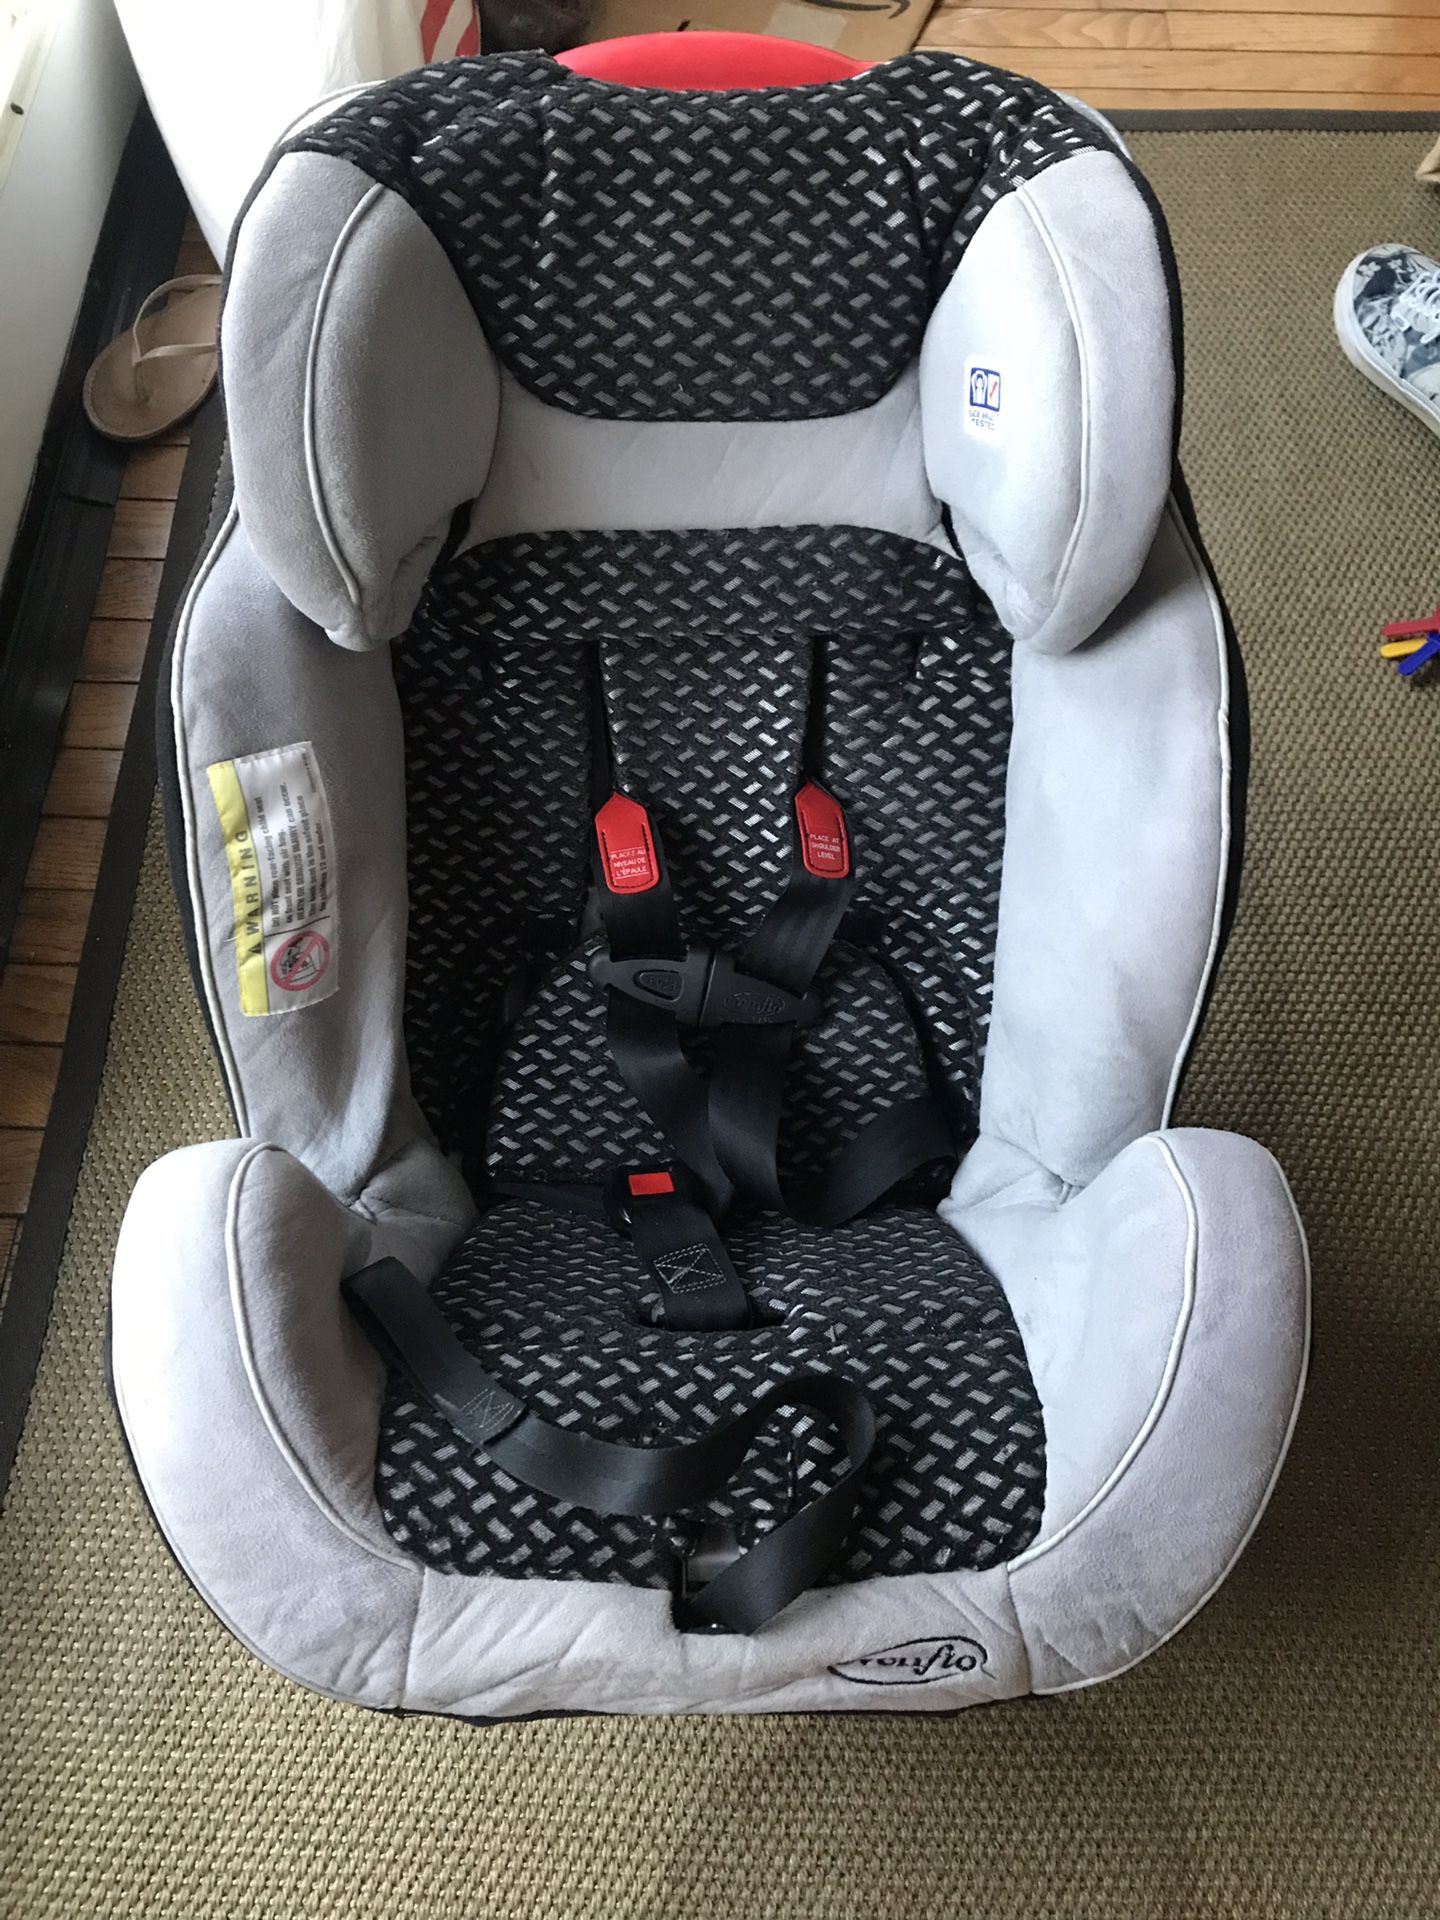 2 FREE car seats, never in accident